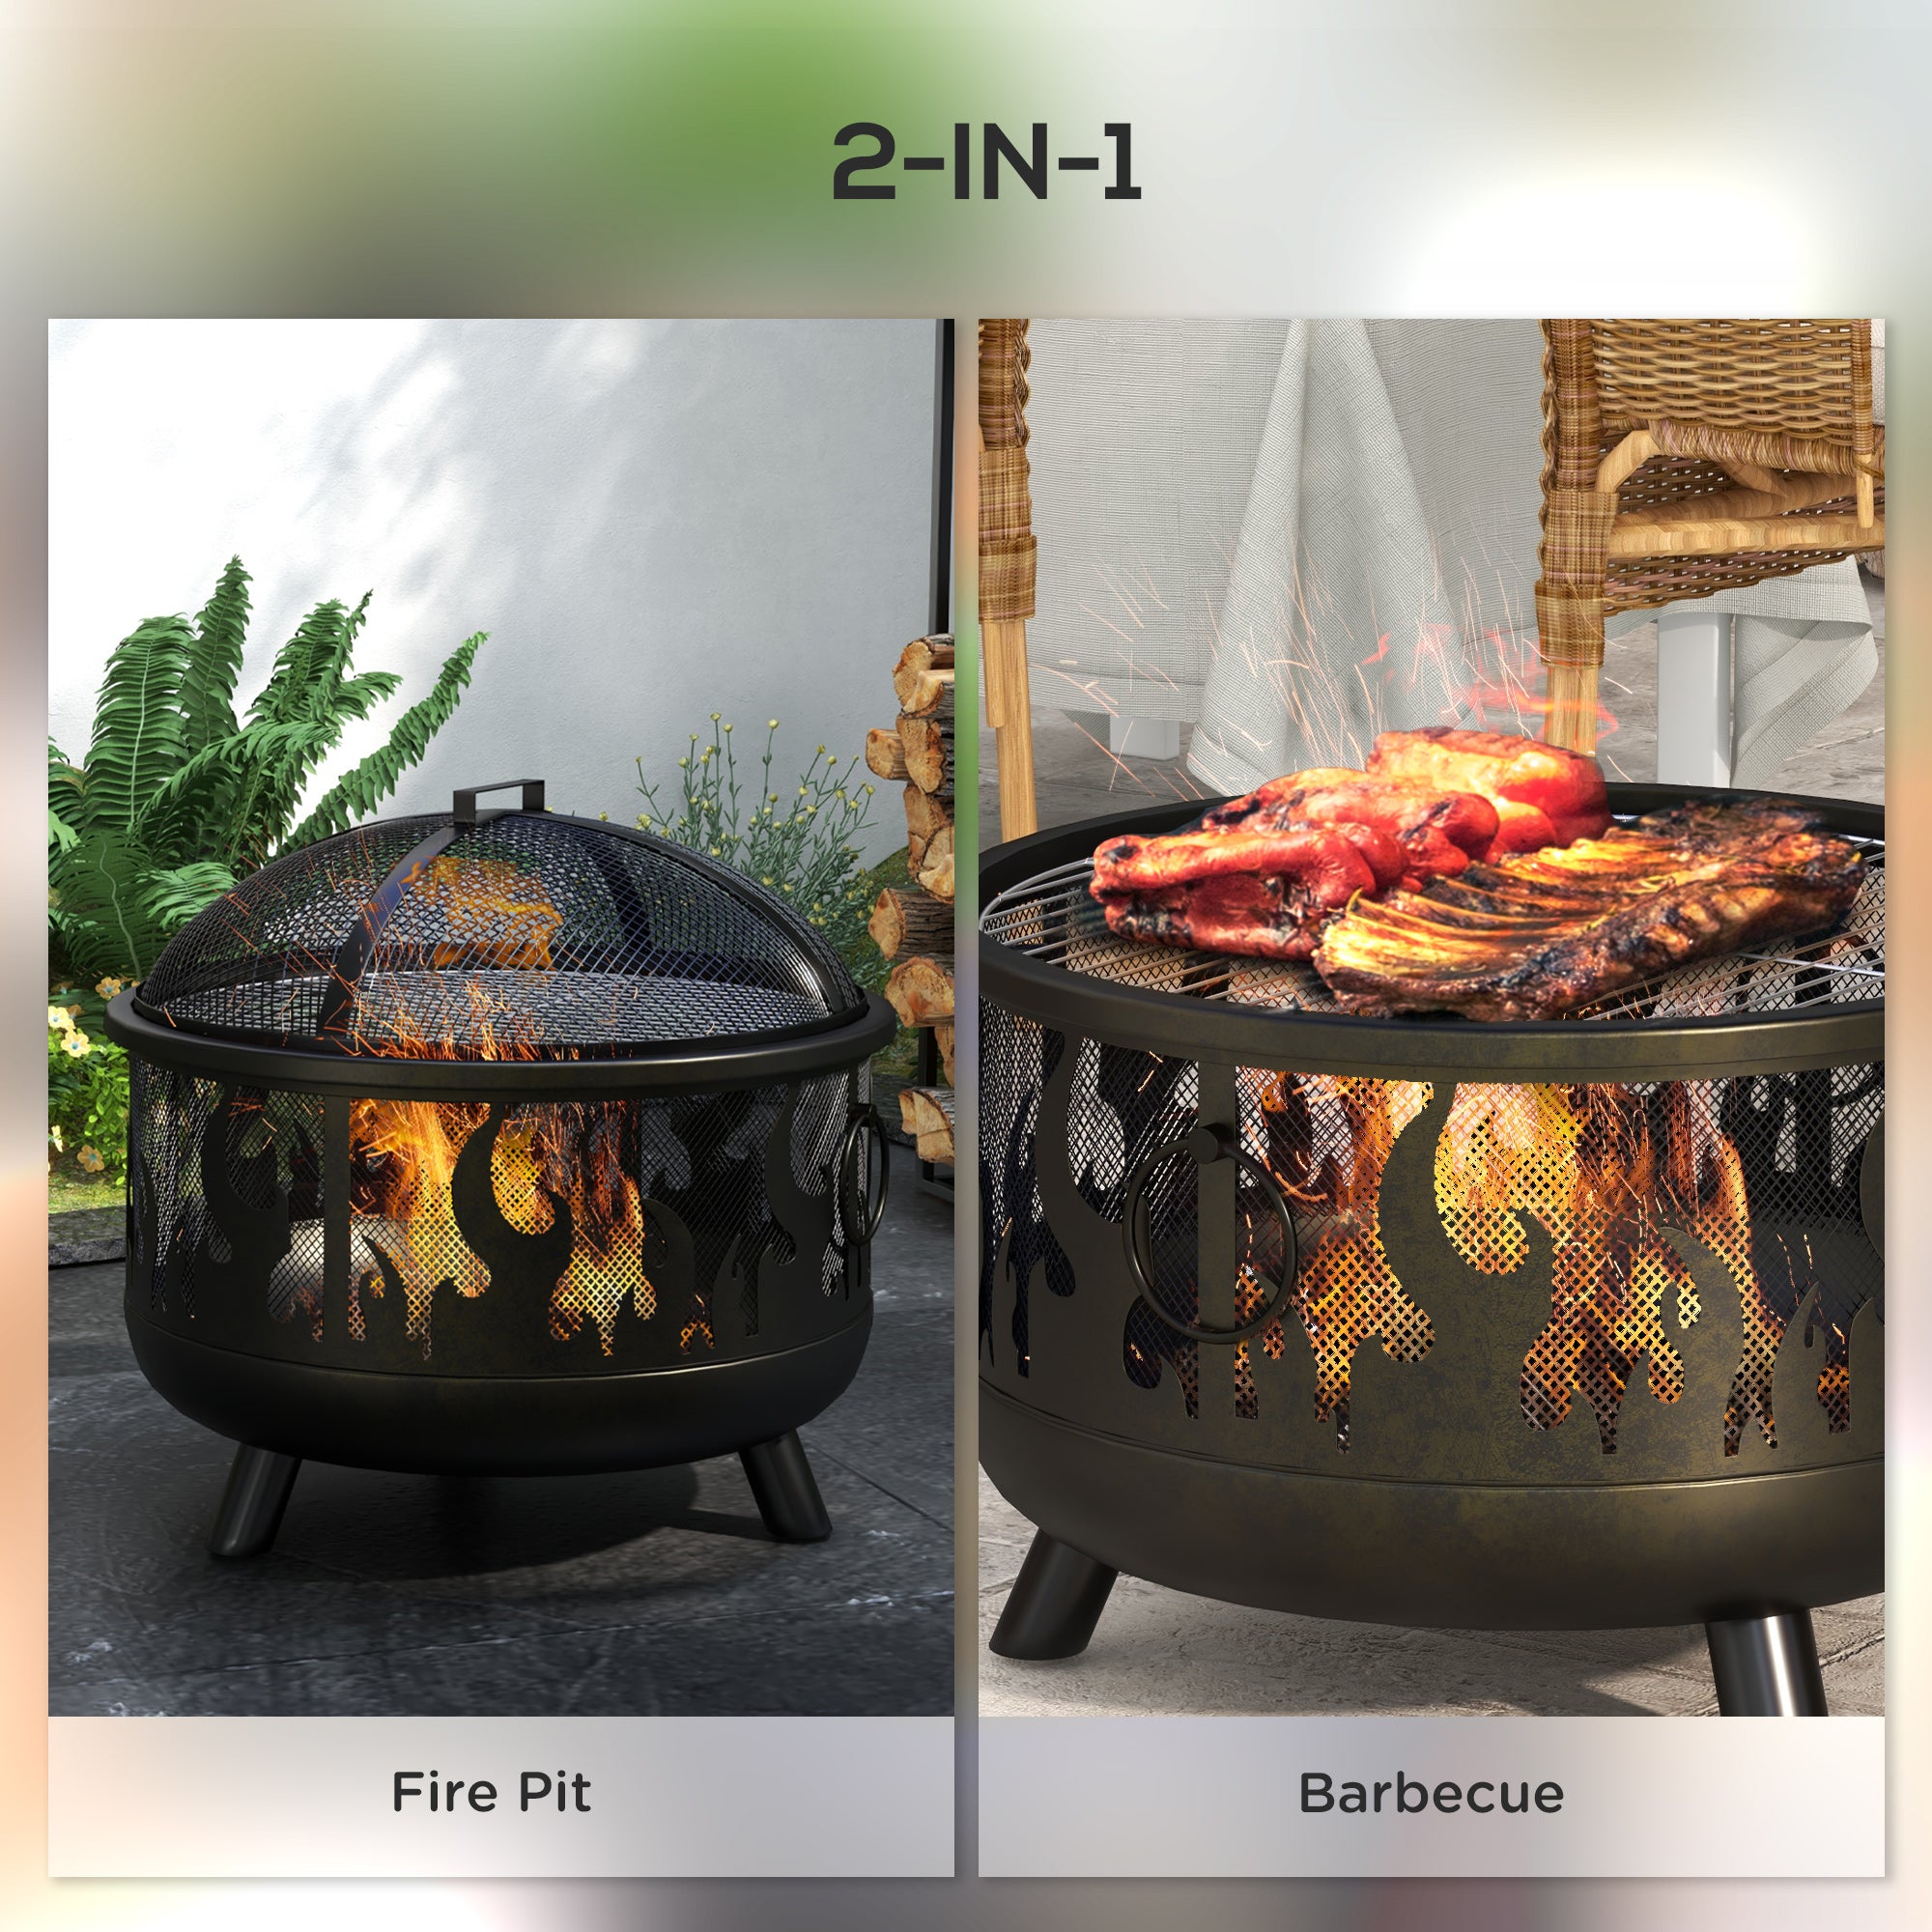 Outsunny Metal Firepit Bowl Outdoor 2-In-1 Round Fire Pit w/ Lid, Grill, Poker, Handles for Garden, Camping, BBQ, Bonfire, Wood Burning Stove, 61.5 x 61.5 x 52cm, Black